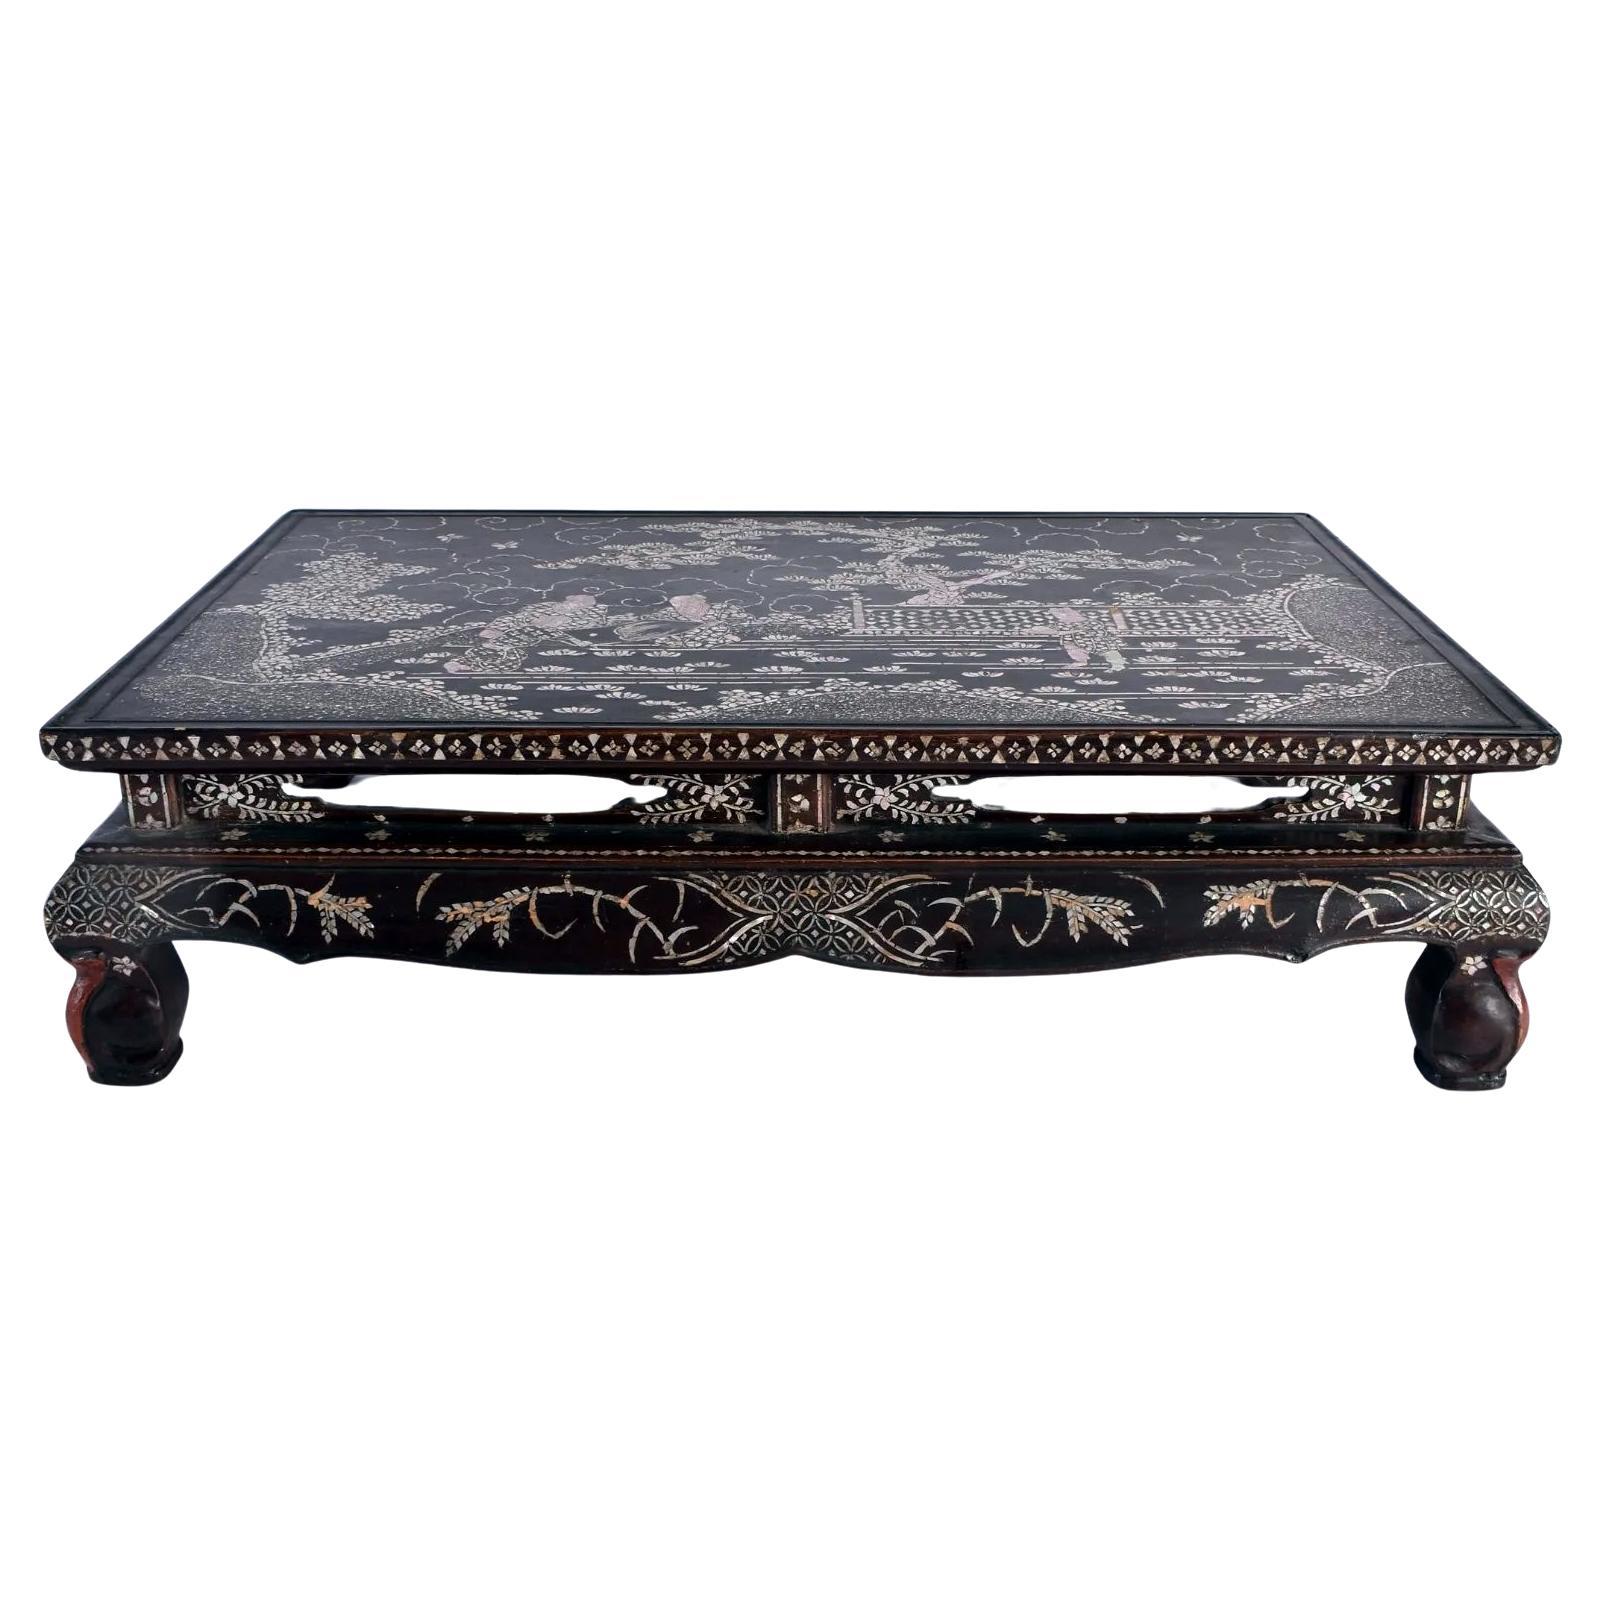 Edo Antique Japanese Lacquer and Inlay Kang Table from Ryukyu Island For Sale